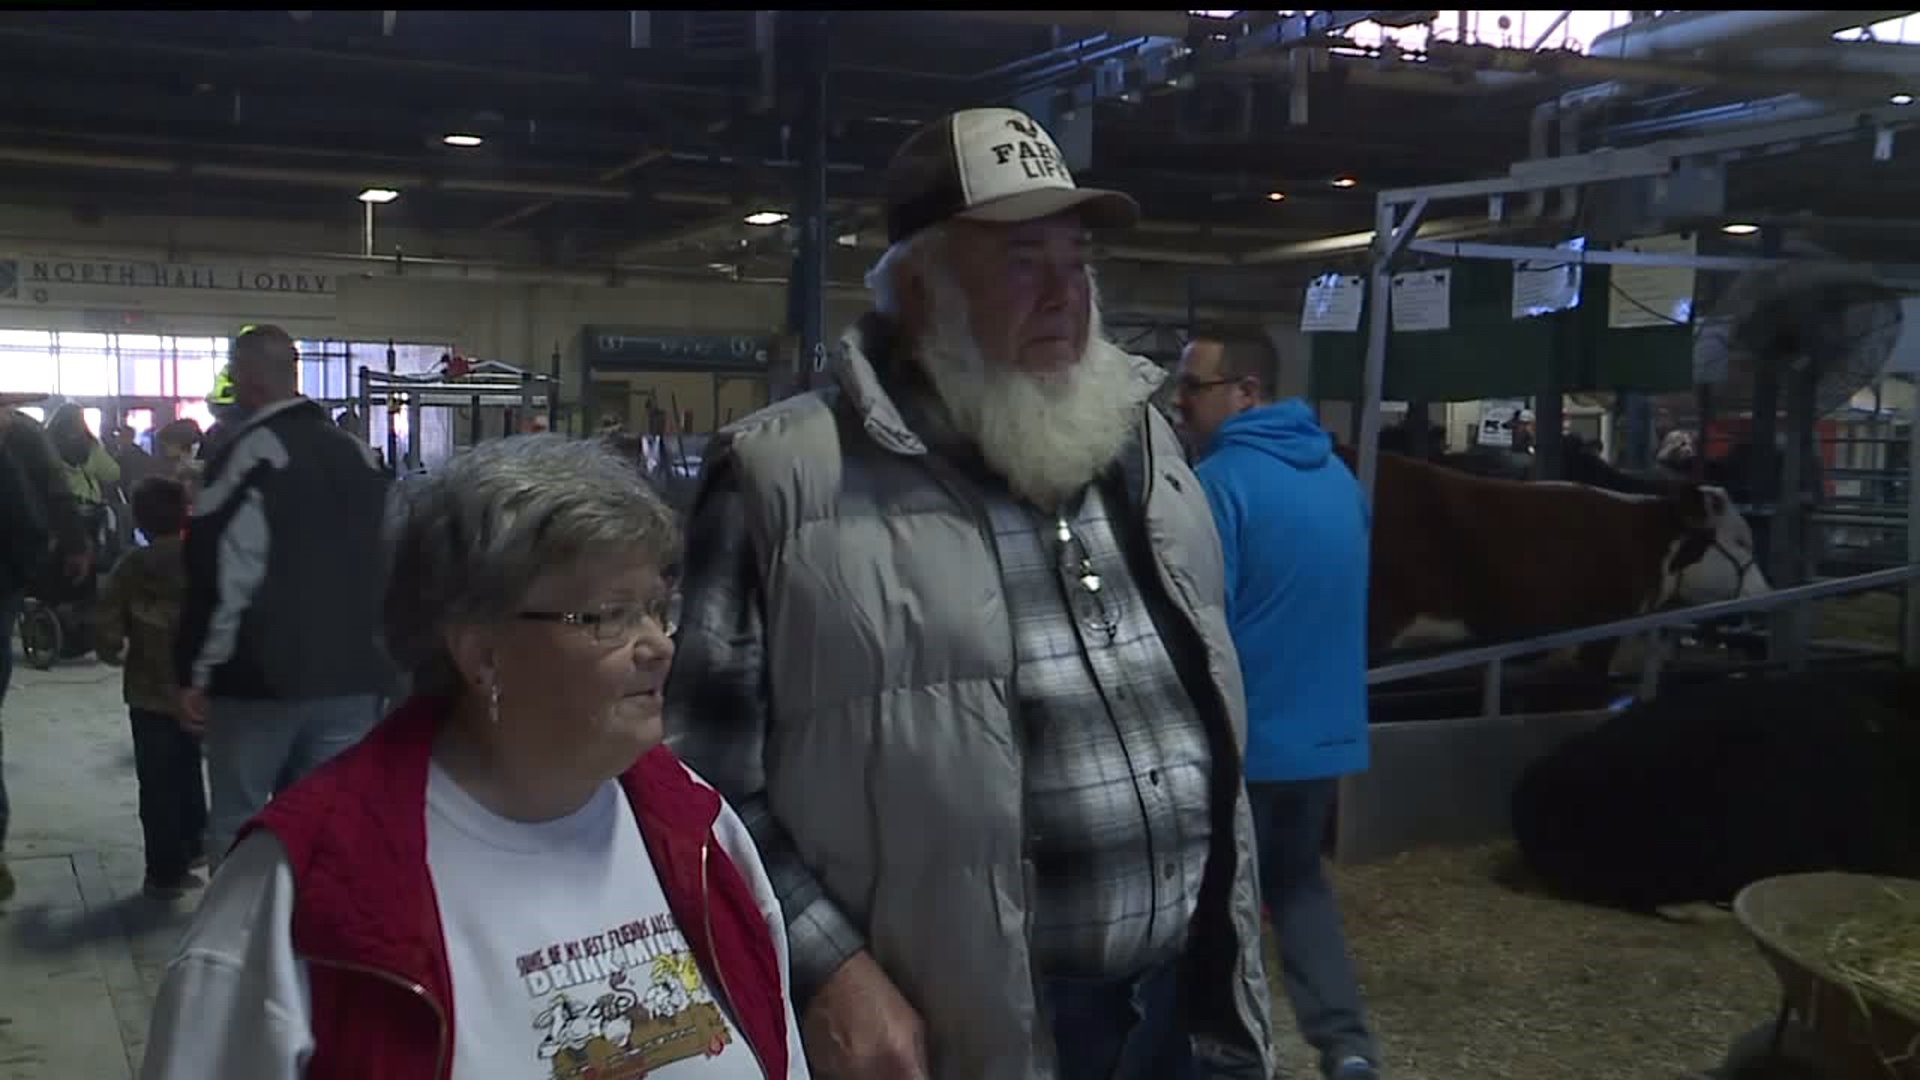 Couple celebrates 50 years together by visiting the place they met: the PA Farm Show